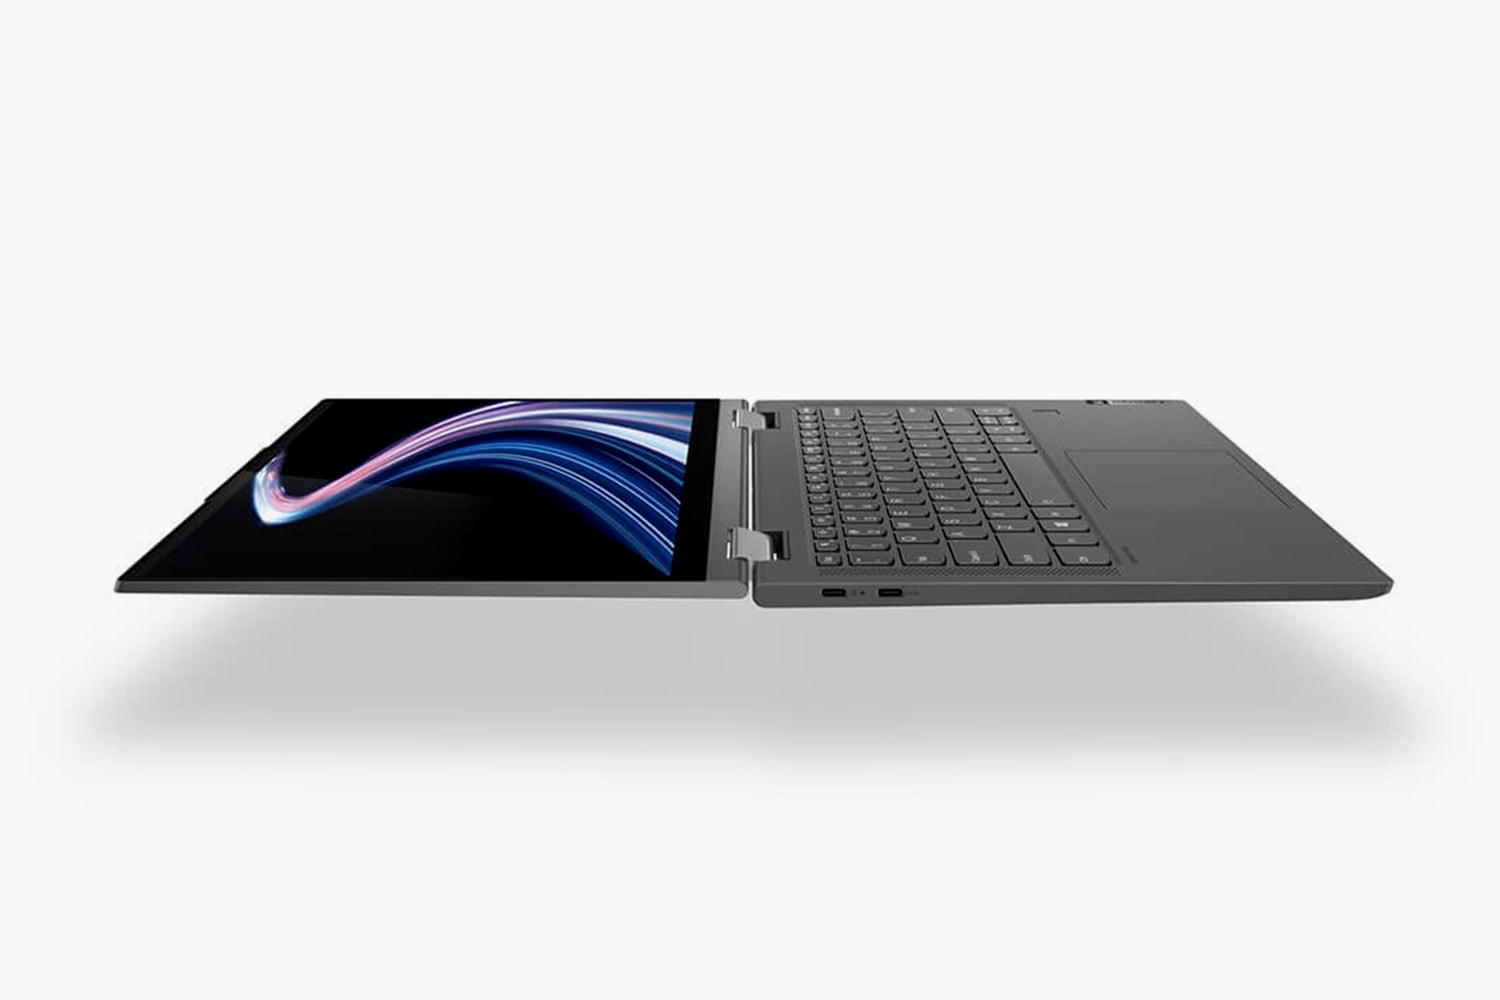 Lenovo Flex 5G laptop fifth generation network higher multi-Gbps data speeds lower latency more reliability